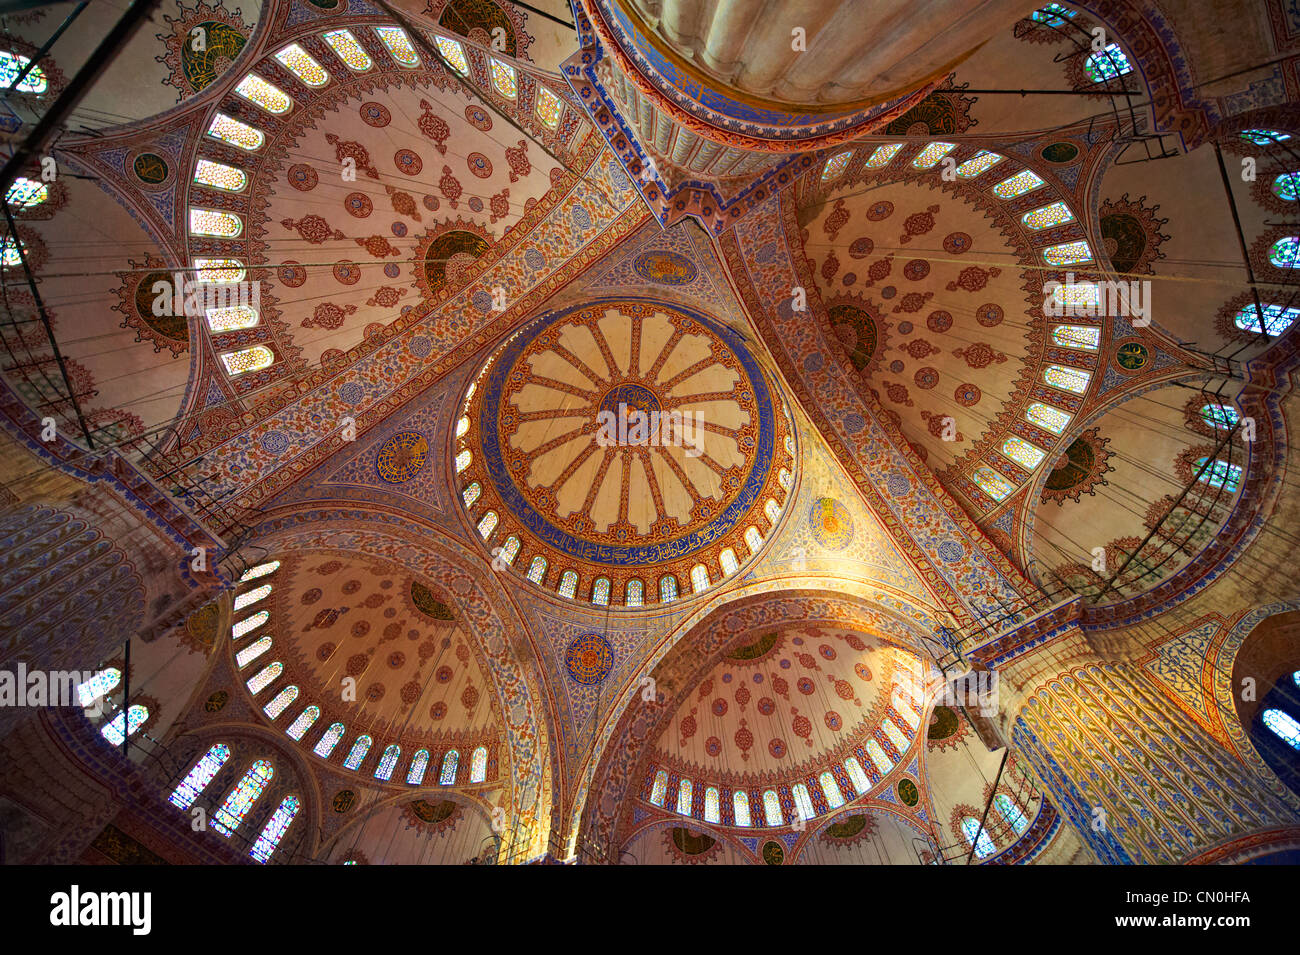 Interior dome & Islamic decorations of the Blue Mosque Istanbul ( Sultan Ahmed Sultanahmet Camii ) Stock Photo